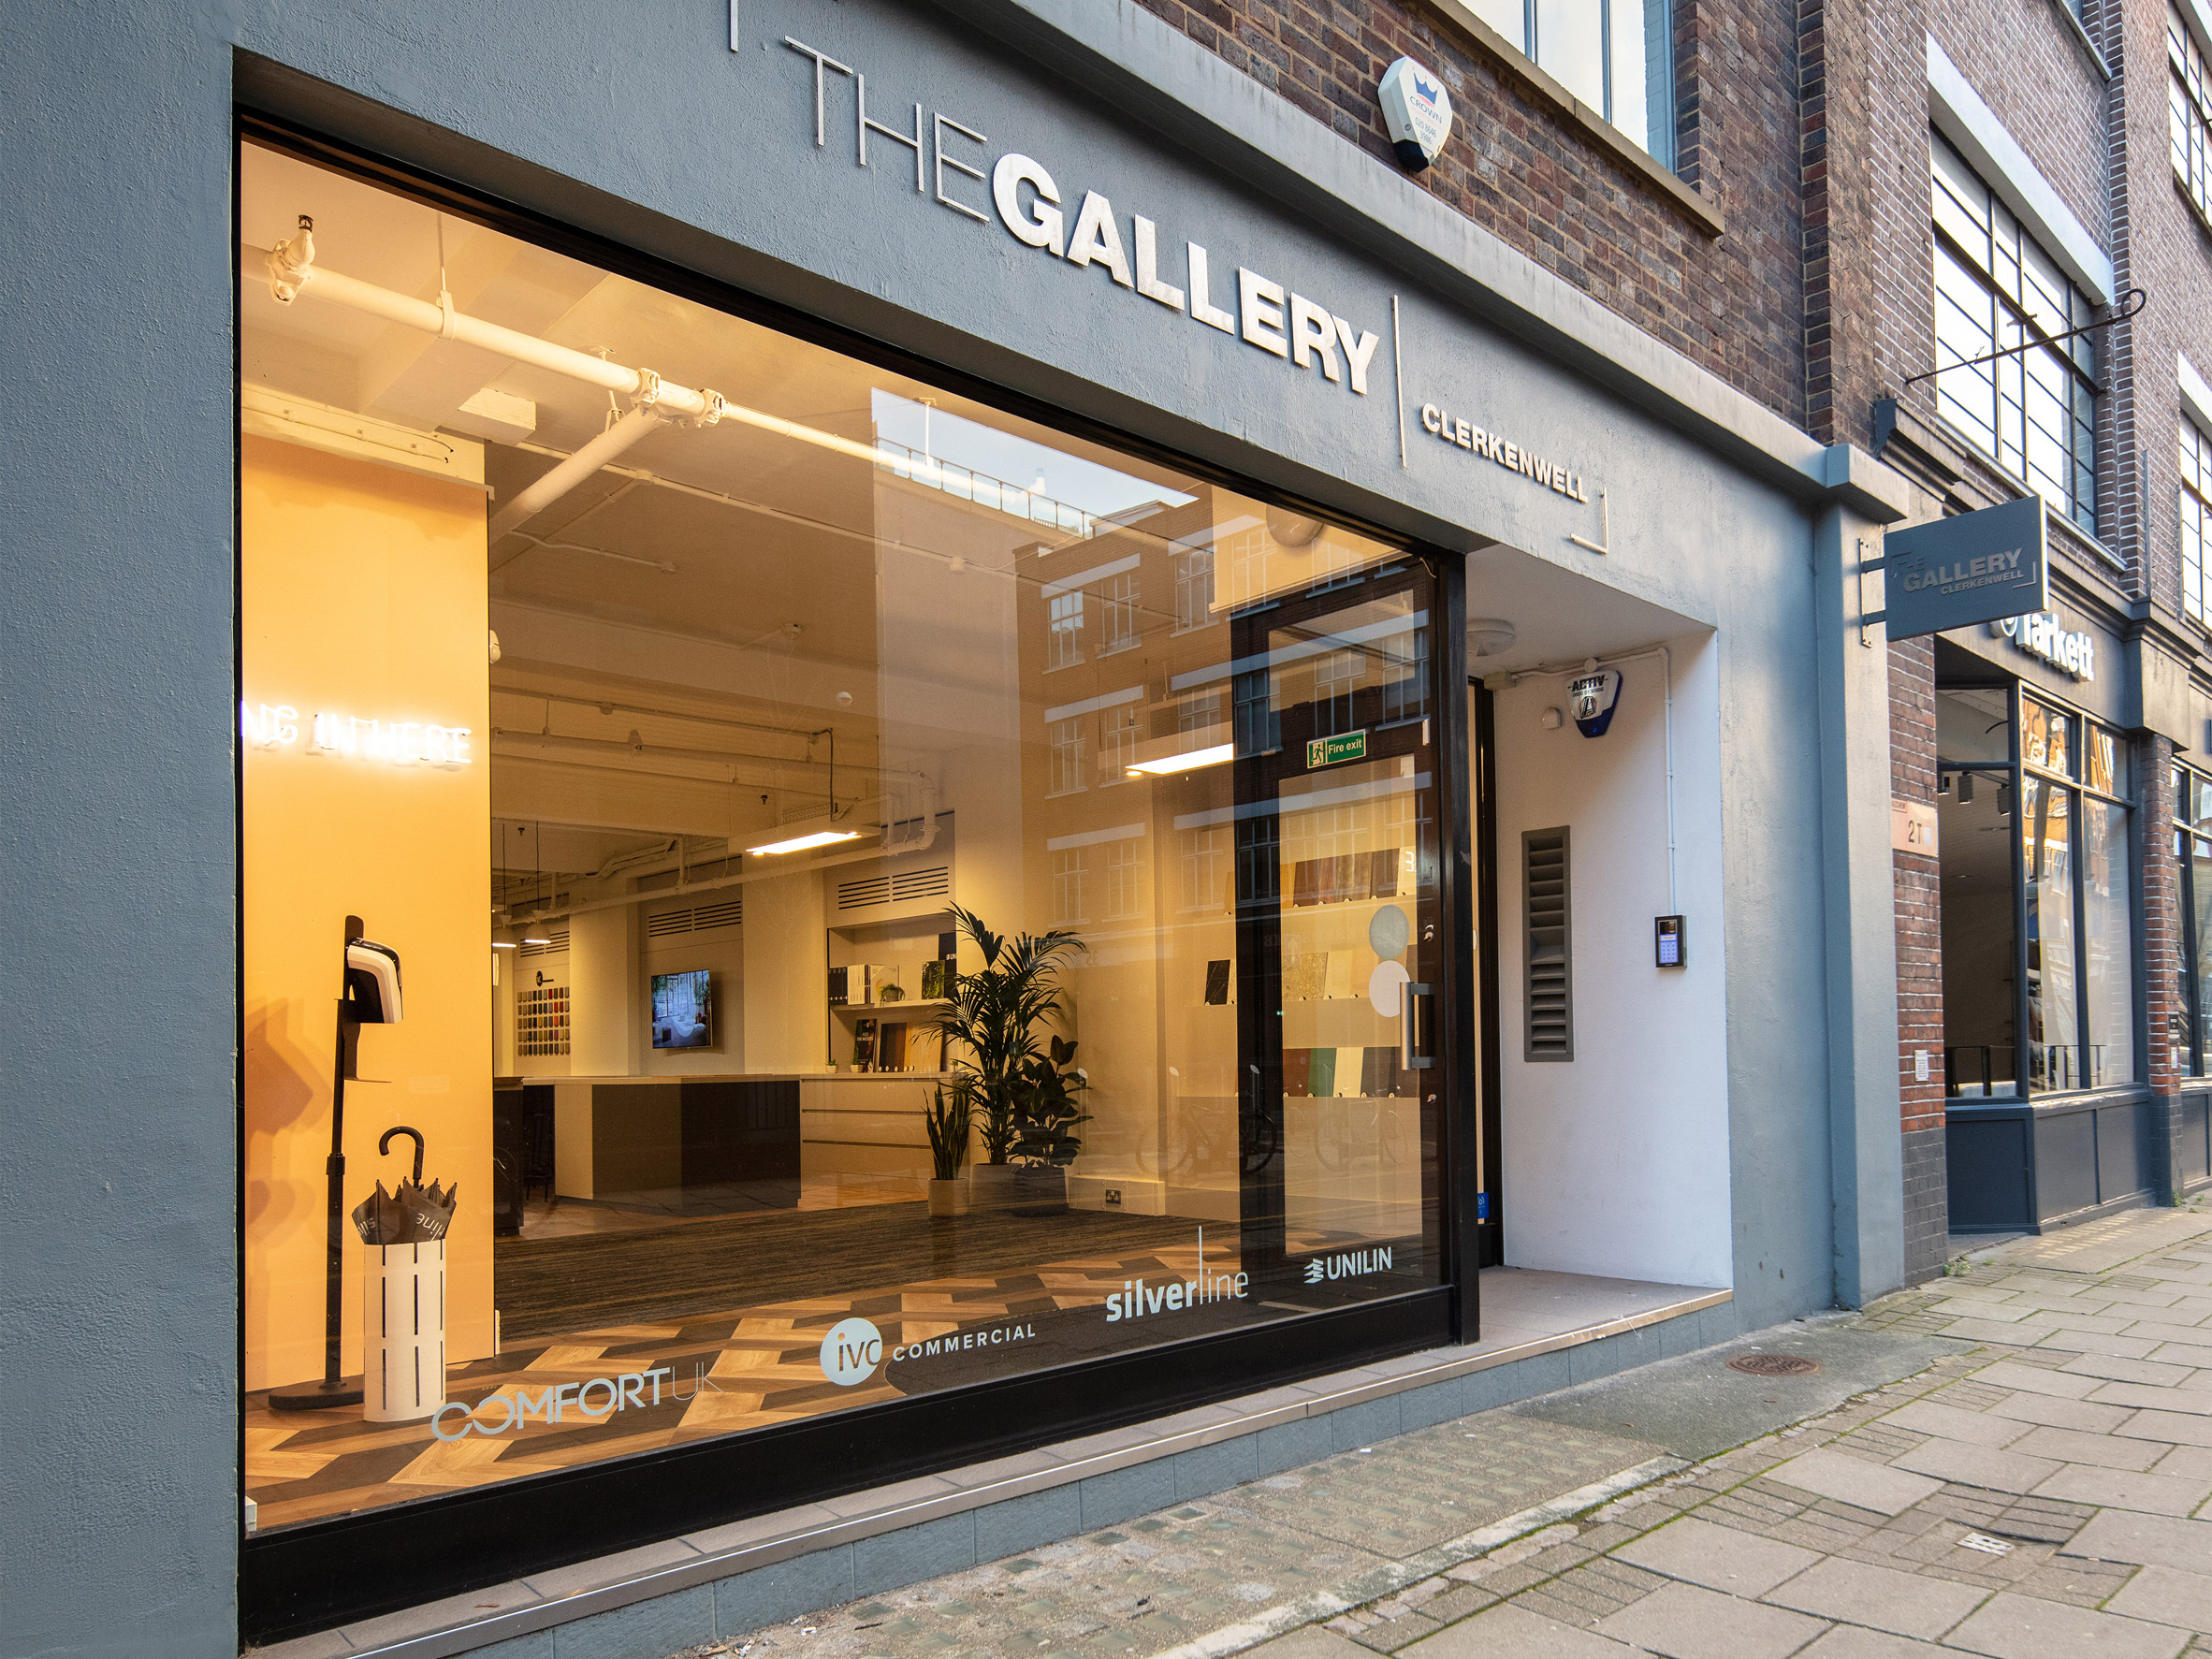 Exterior of The Gallery Clerkenwell